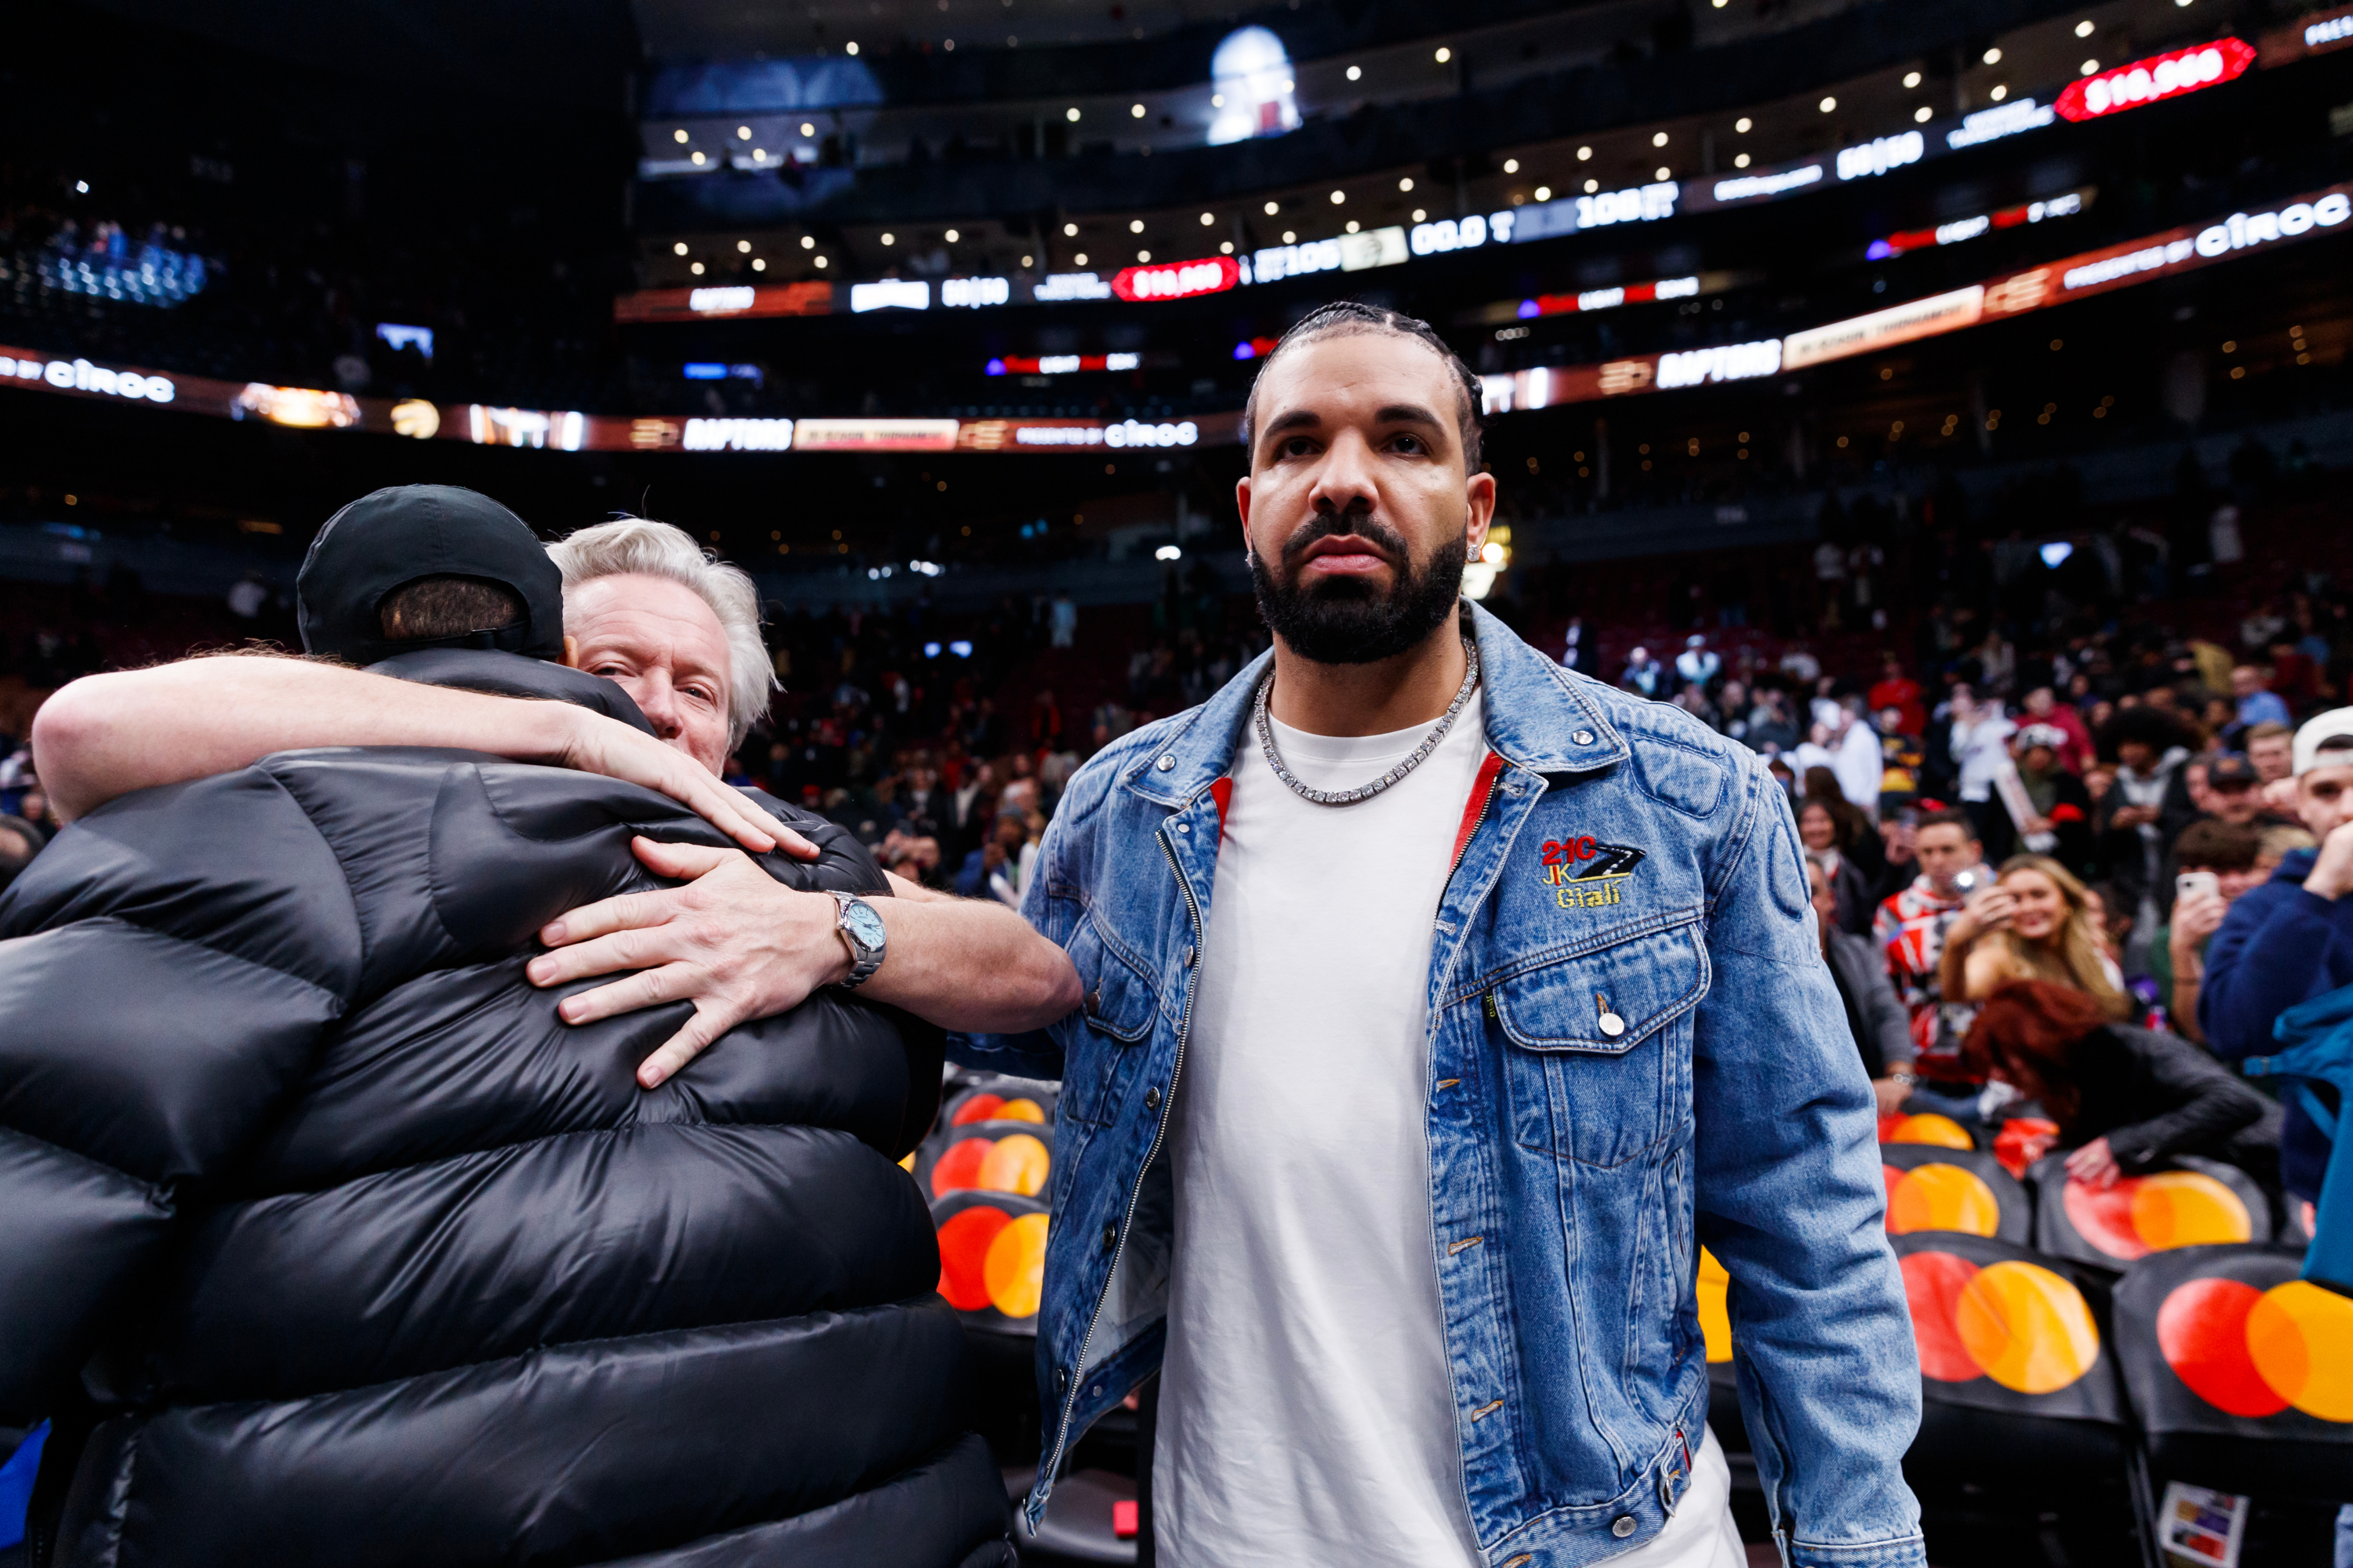 Man in a black puffer jacket hugging someone at a sports event; Drake stands by, wearing a denim jacket